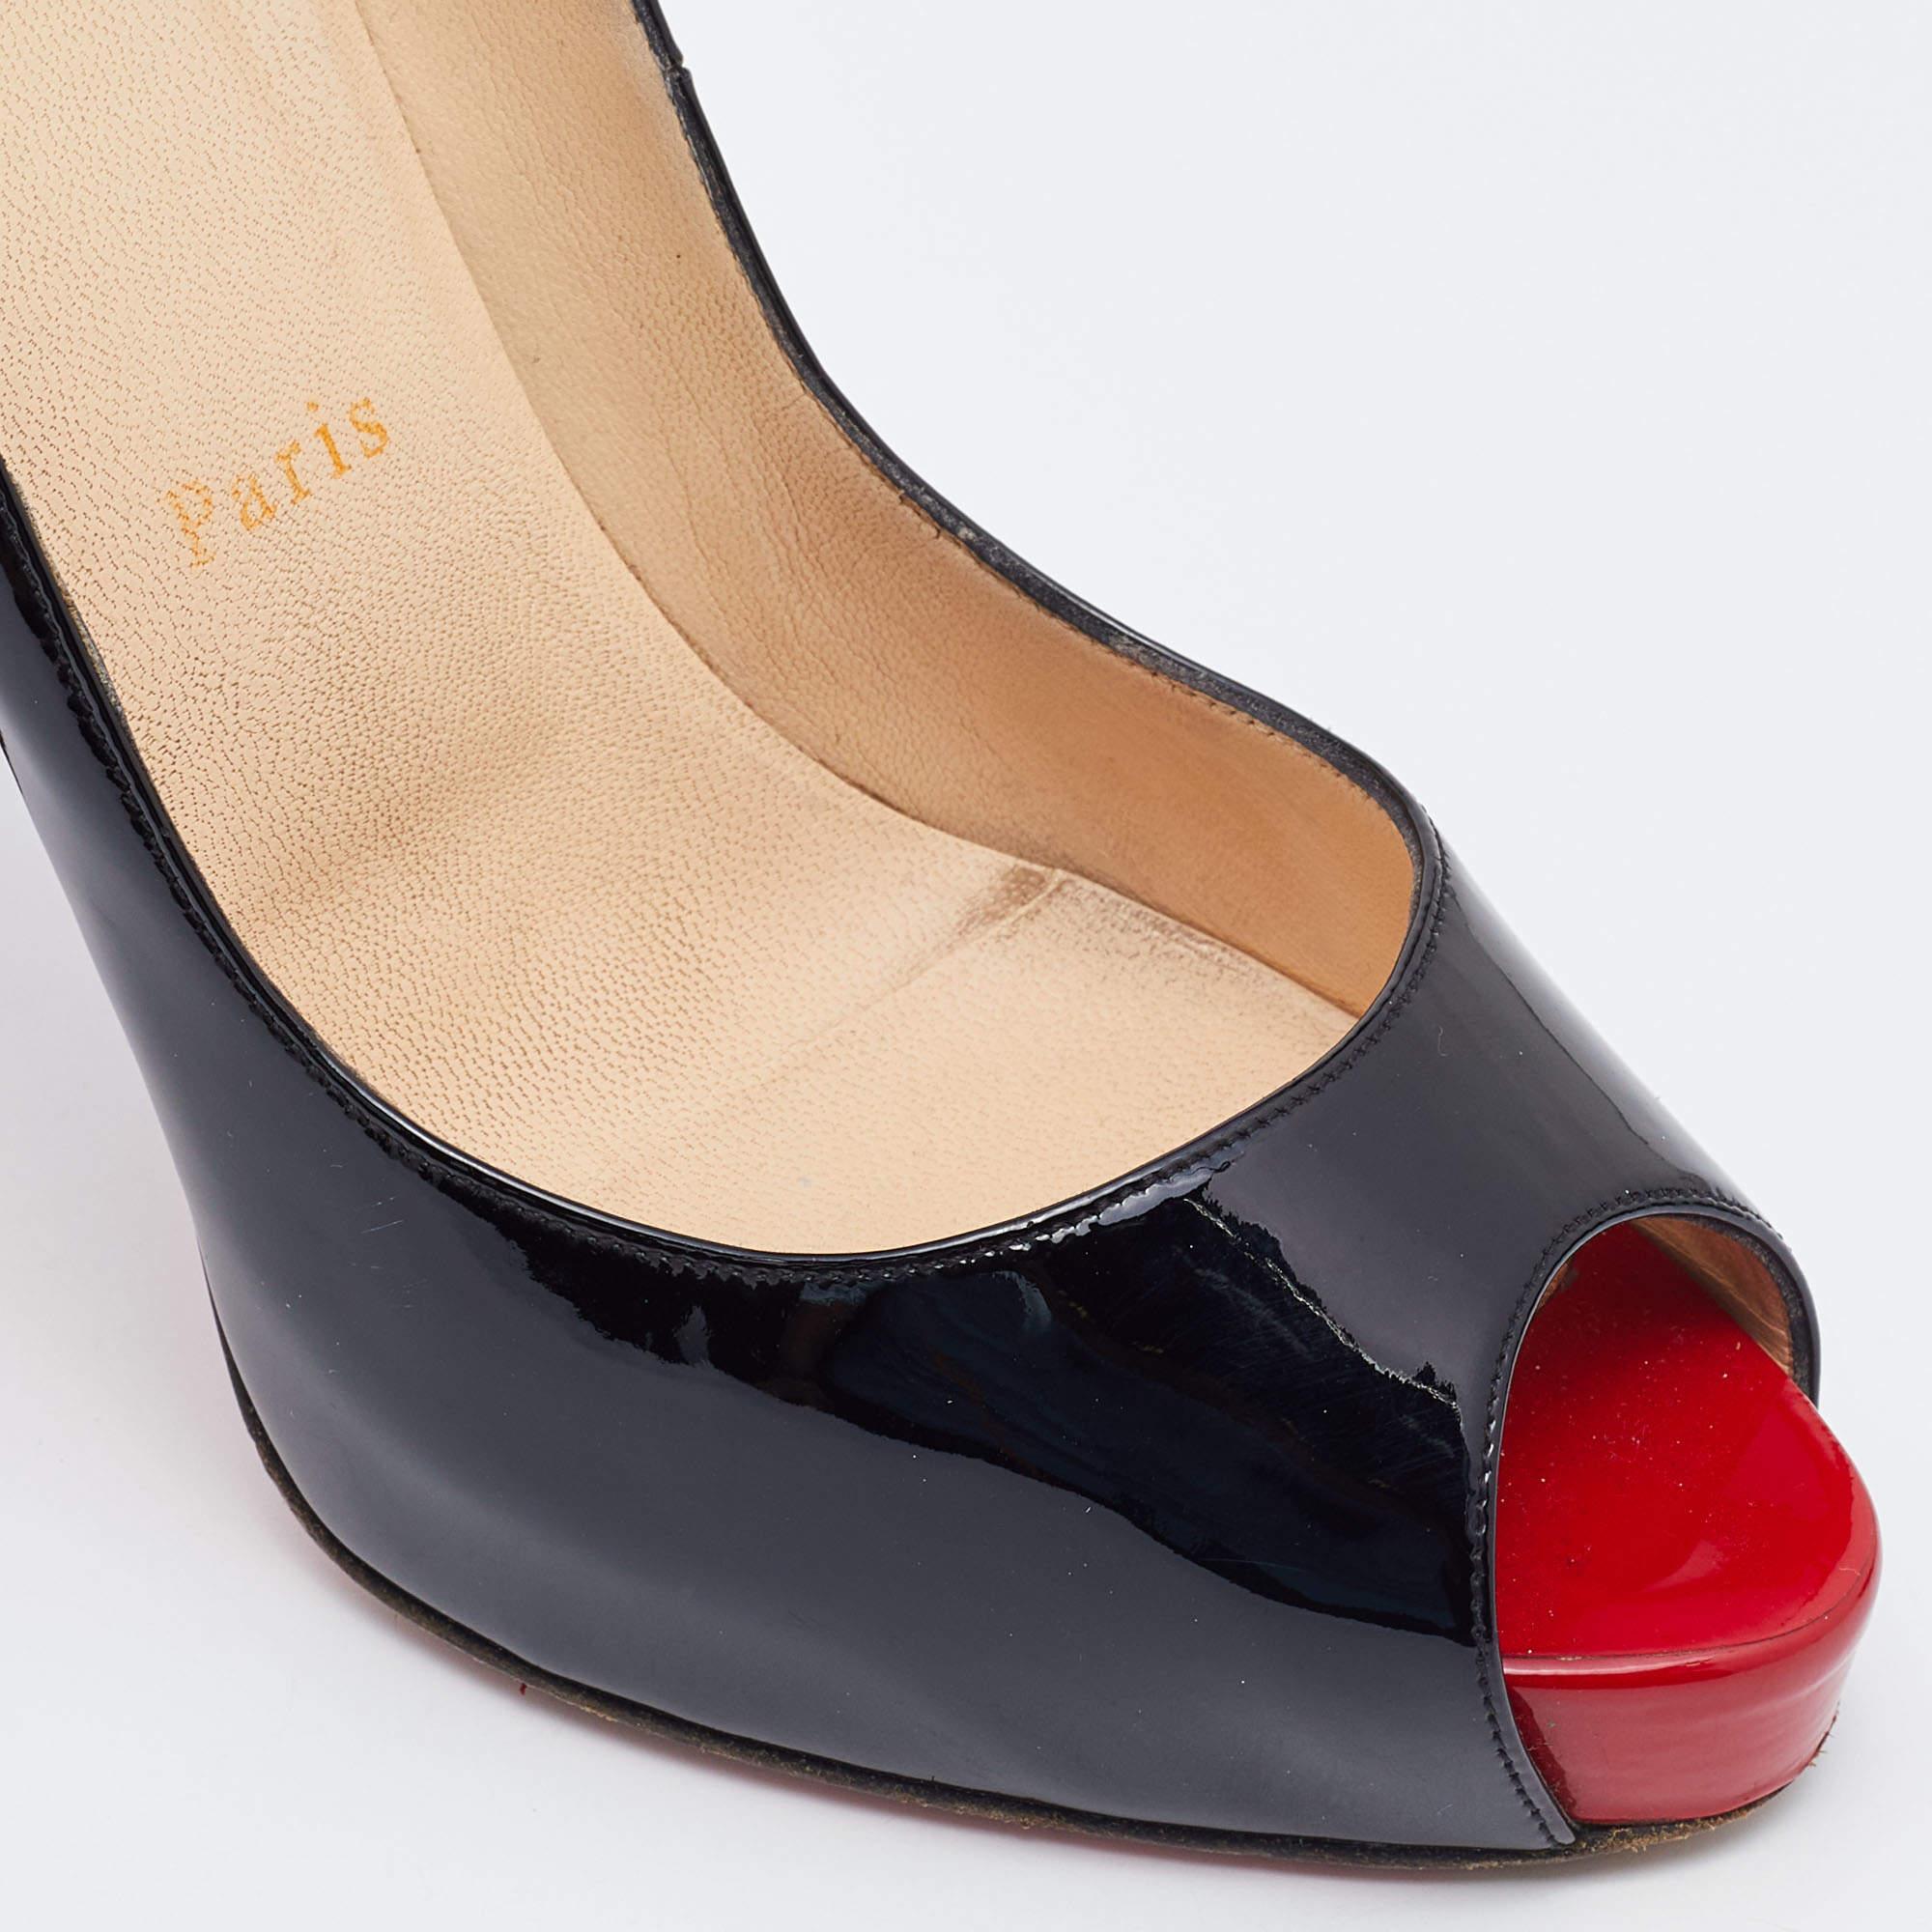 Christian Louboutin Black Patent Leather New Very Prive Pumps Size 39 For Sale 2